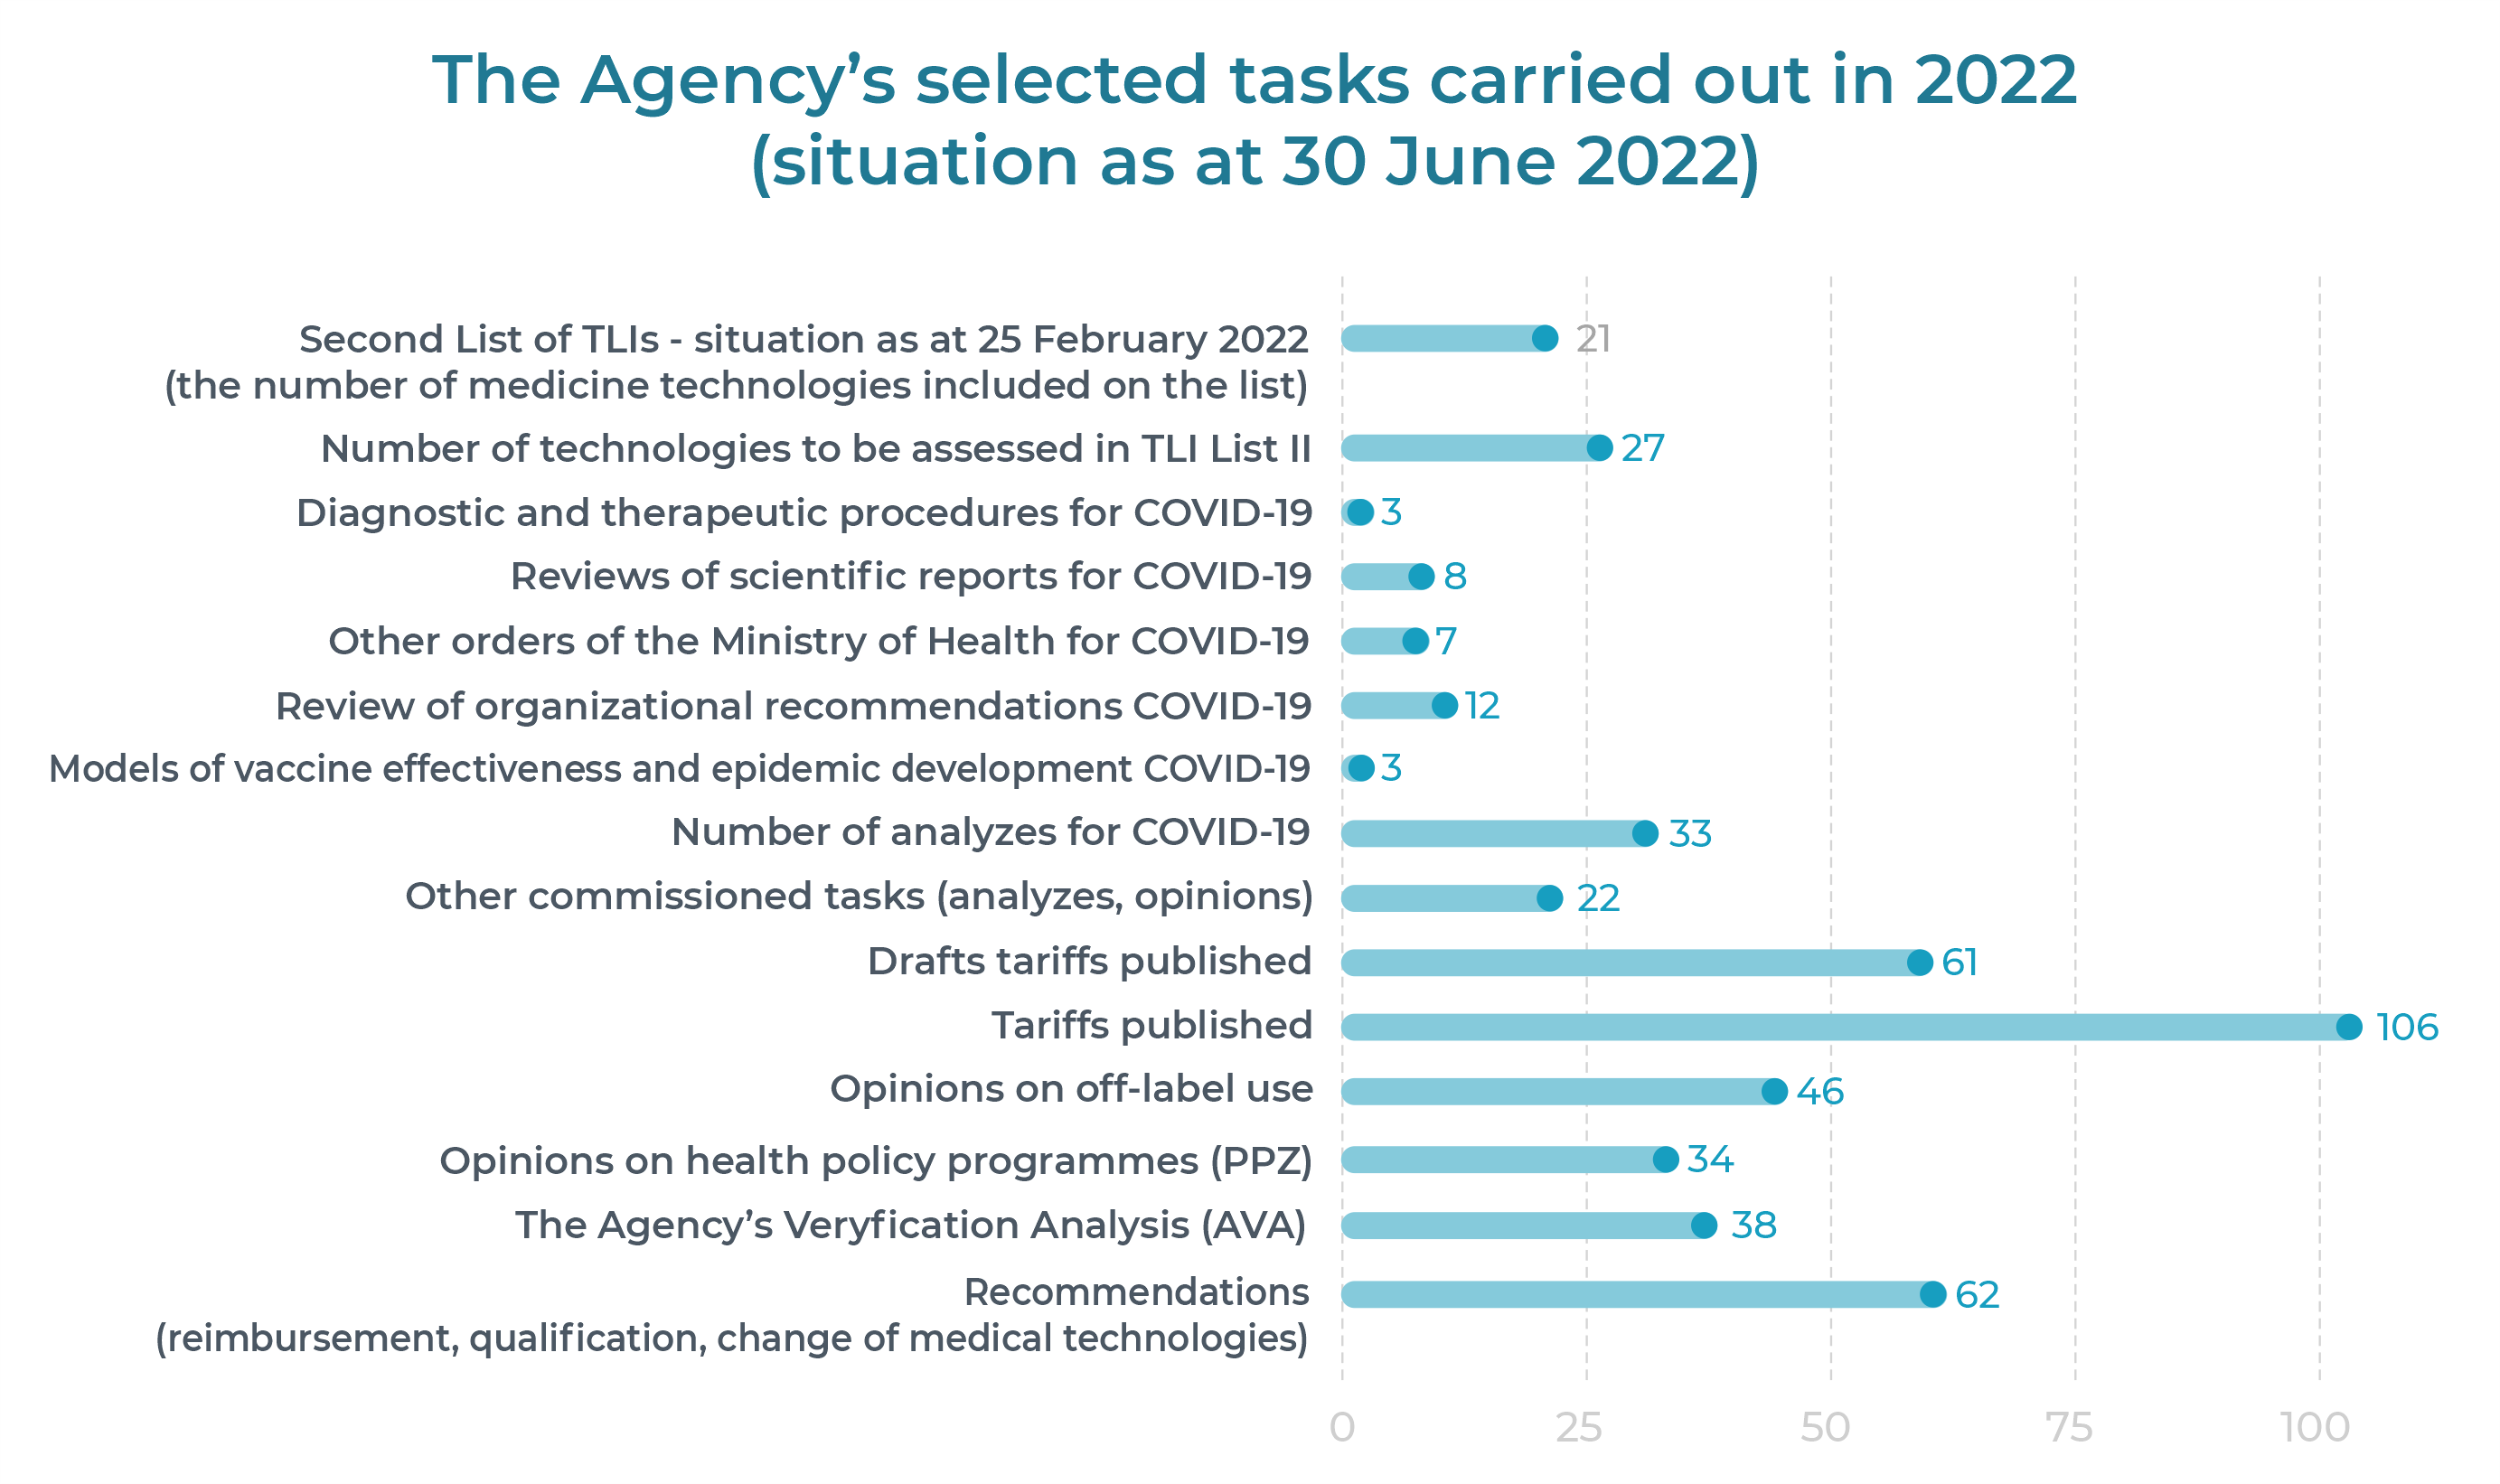 The graphic shows the Agency's selected tasks carried out in 2022 9situation as  at 30 June 2022)